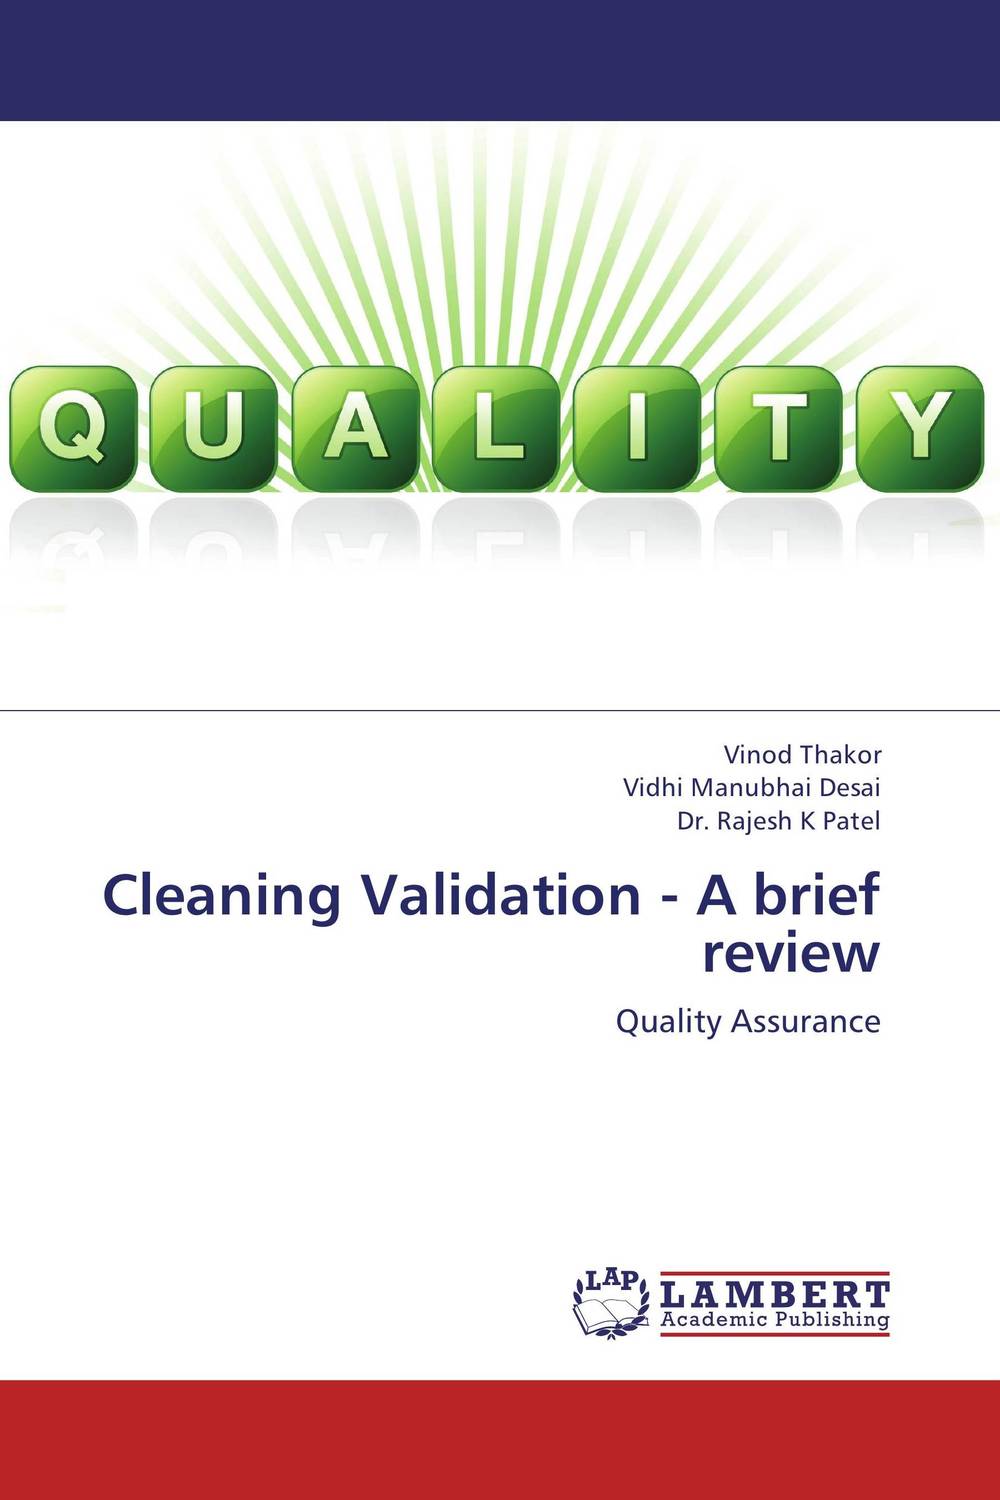 Cleaning Validation - A brief review